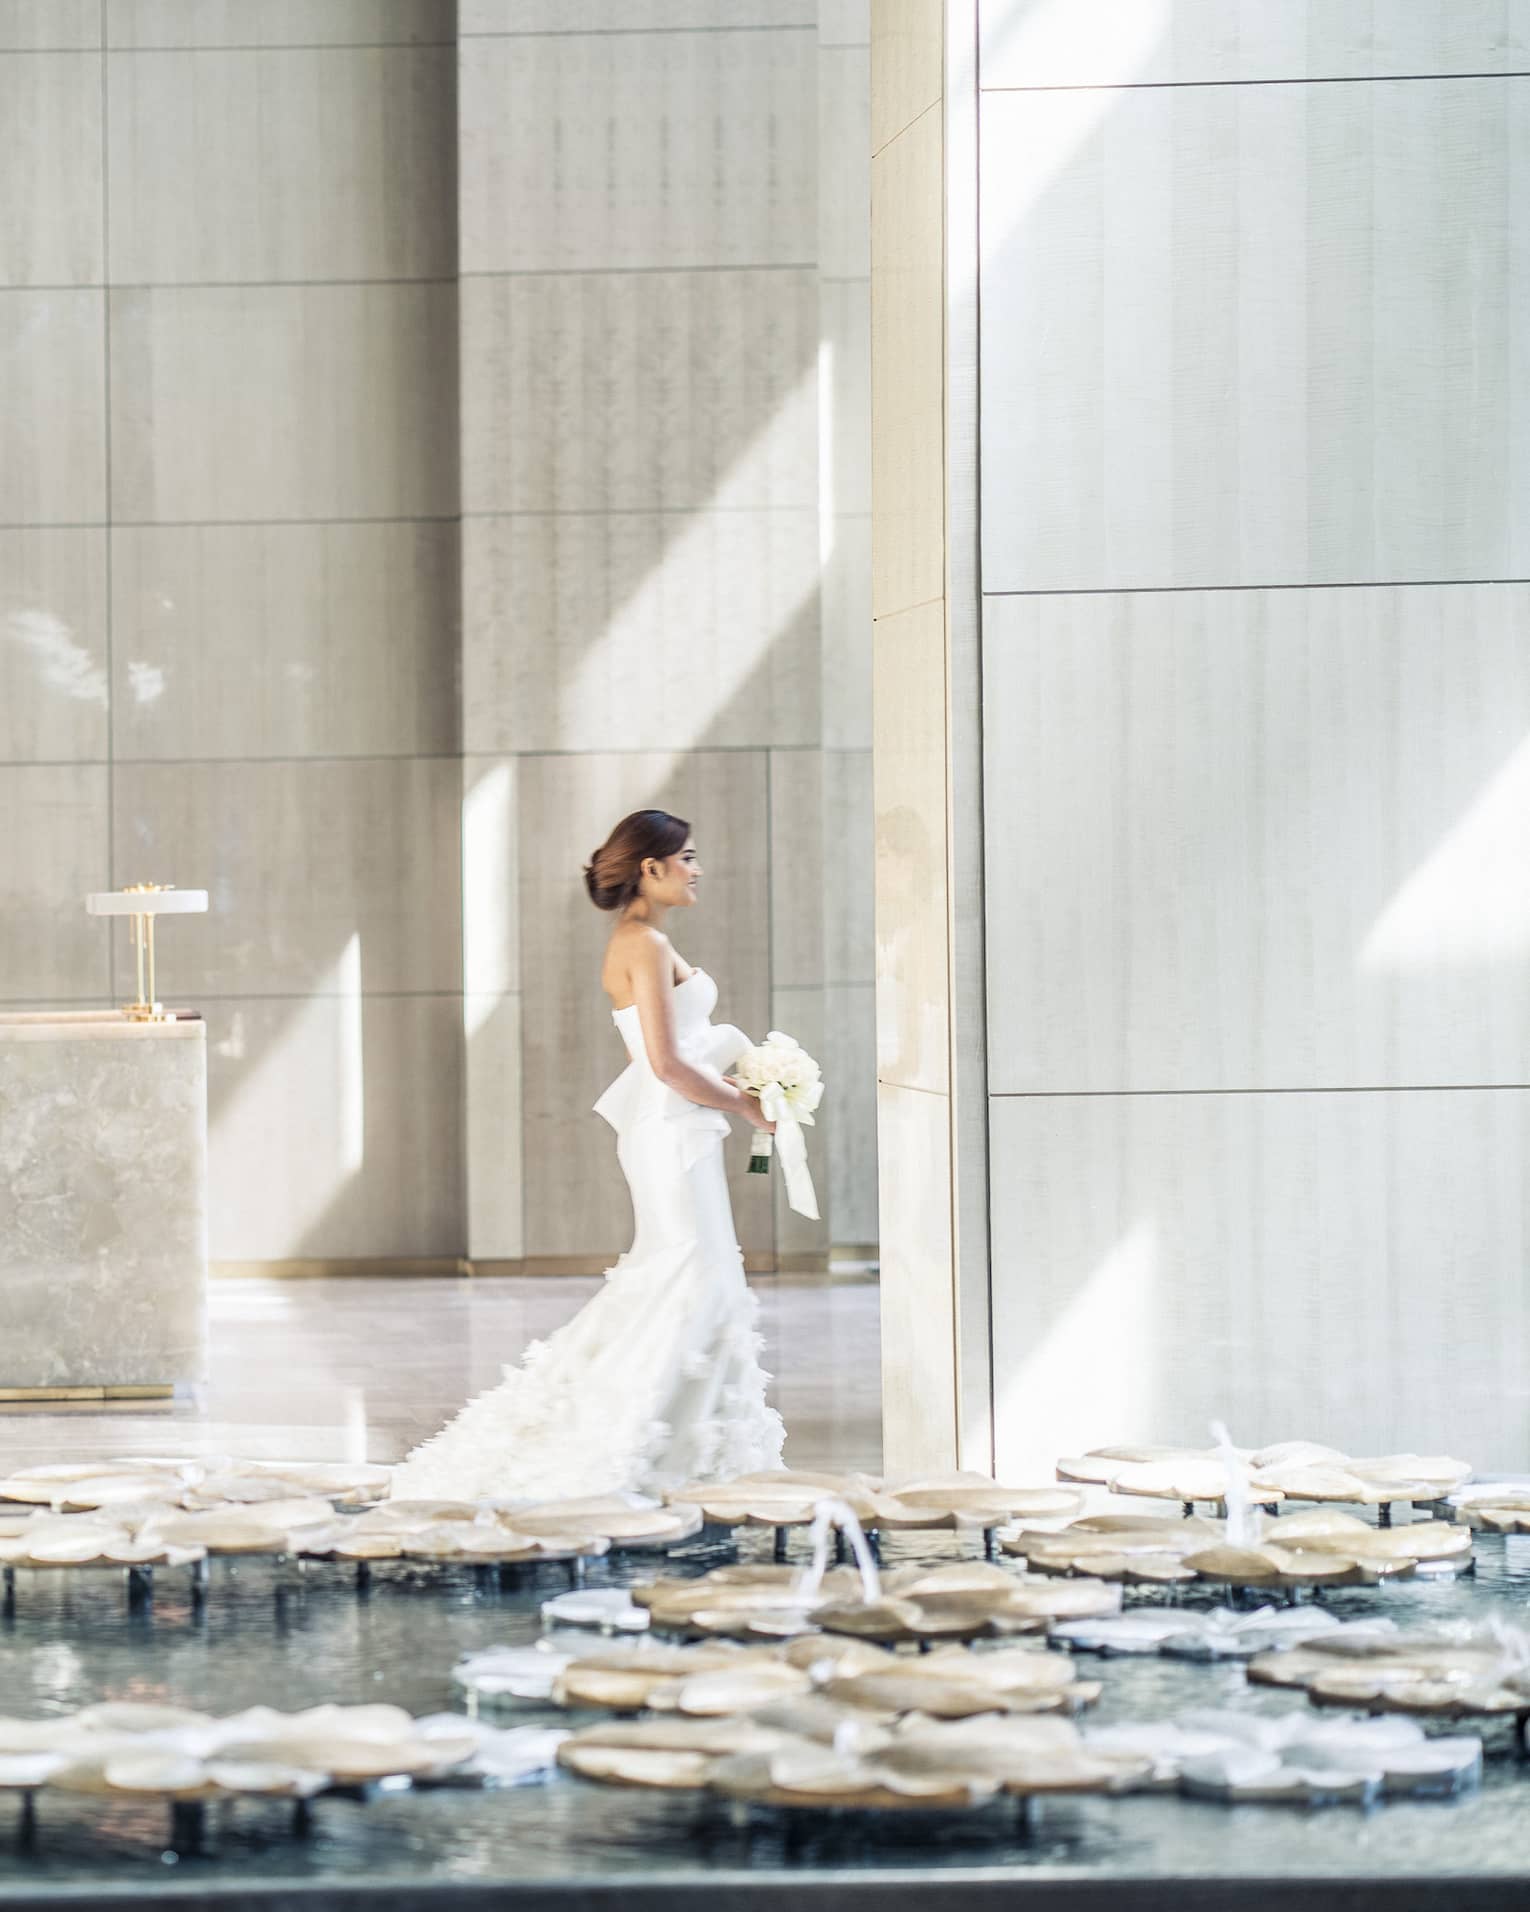 Sun rays illuminates a bride as she walks through a white walled lobby carrying her bouquet of white flowers